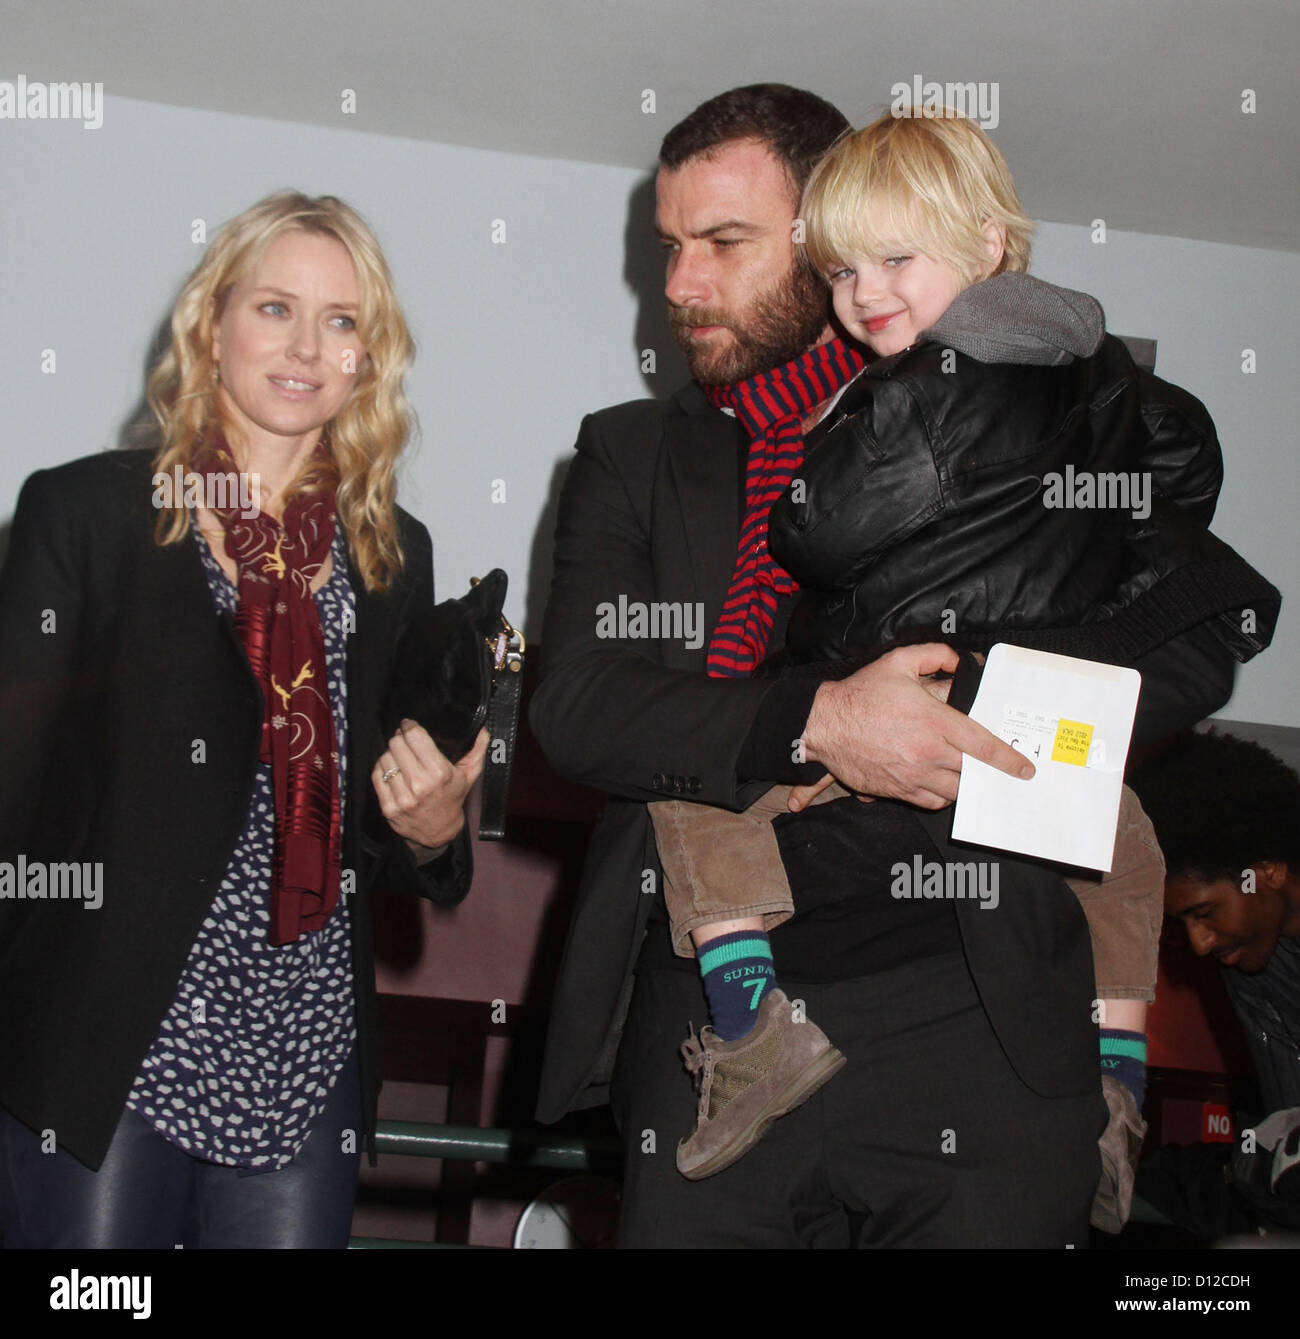 Dec. 5, 2012 - New York, New York, U.S. - Actors NAOMI WATTS, LIEV SCHREIBER and their son attend the New 42nd Street Gala, To Honor Australia Council for the Arts in celebration of The New Victory Theater Education Programs held at The New Victory Theater. (Credit Image: © Nancy Kaszerman/ZUMAPRESS.com) Stock Photo